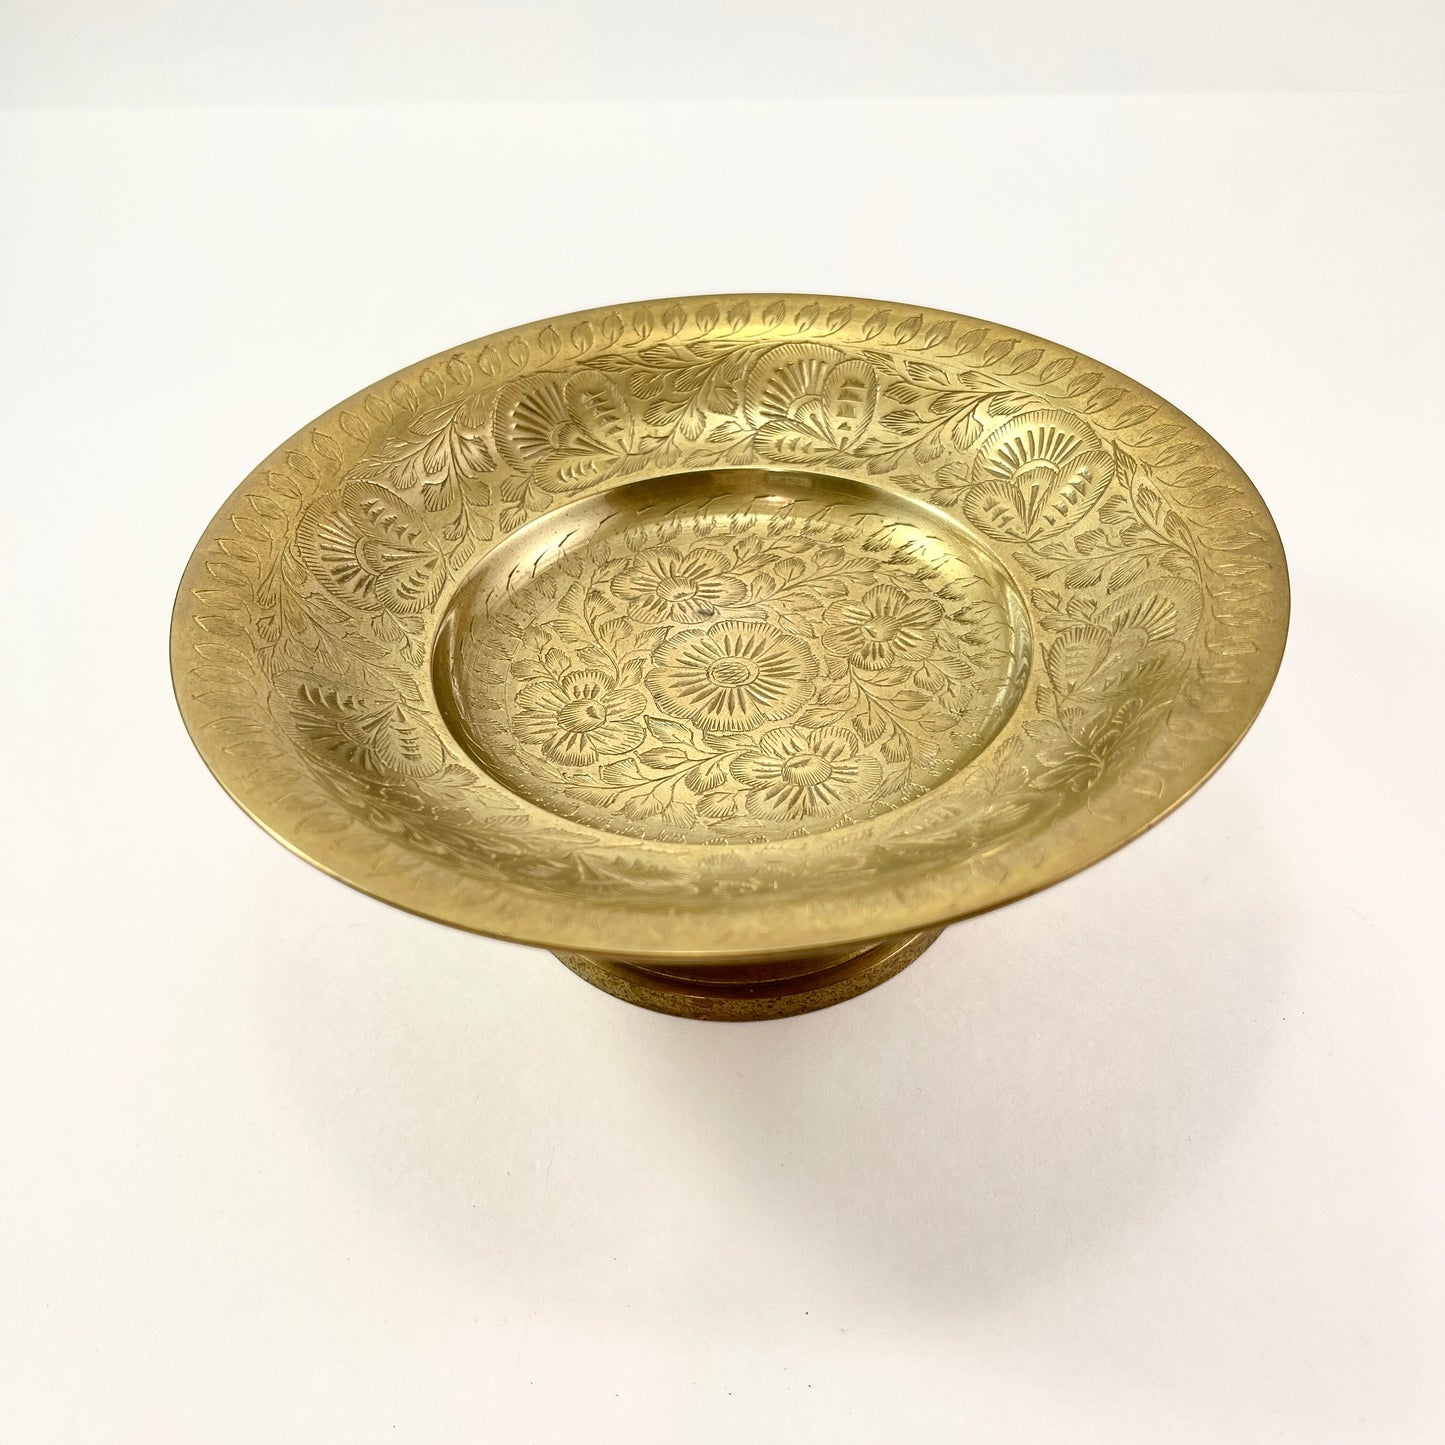 Vintage Brass Small Footed Bowl or Compote for Brass Collection